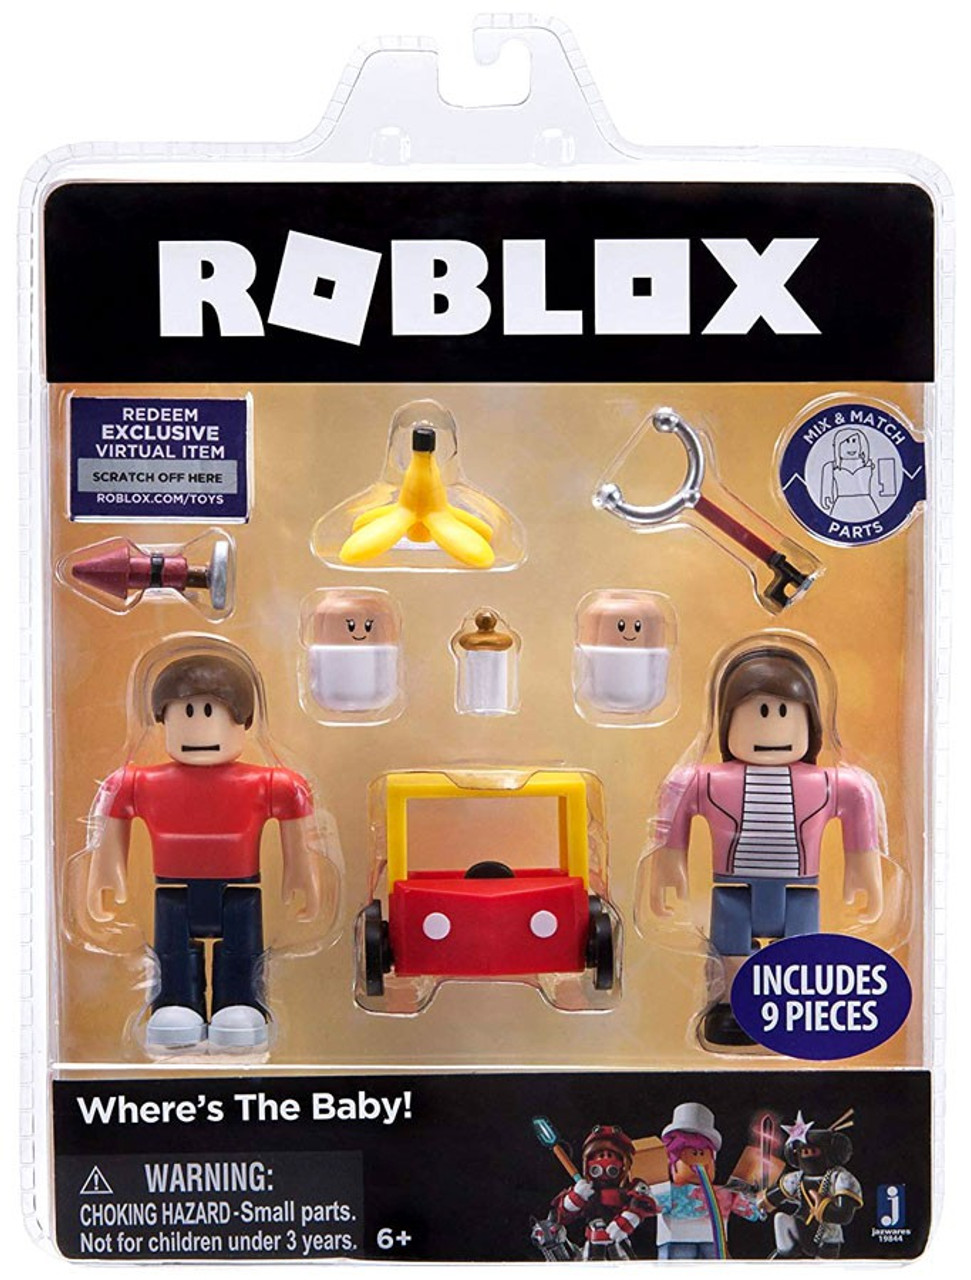 Roblox Wheres The Baby 3 Action Figure 2 Pack Jazwares Toywiz - amazon com roblox loyal pizza warrior 2 75 inch figure with exclusive virtual item code toys games